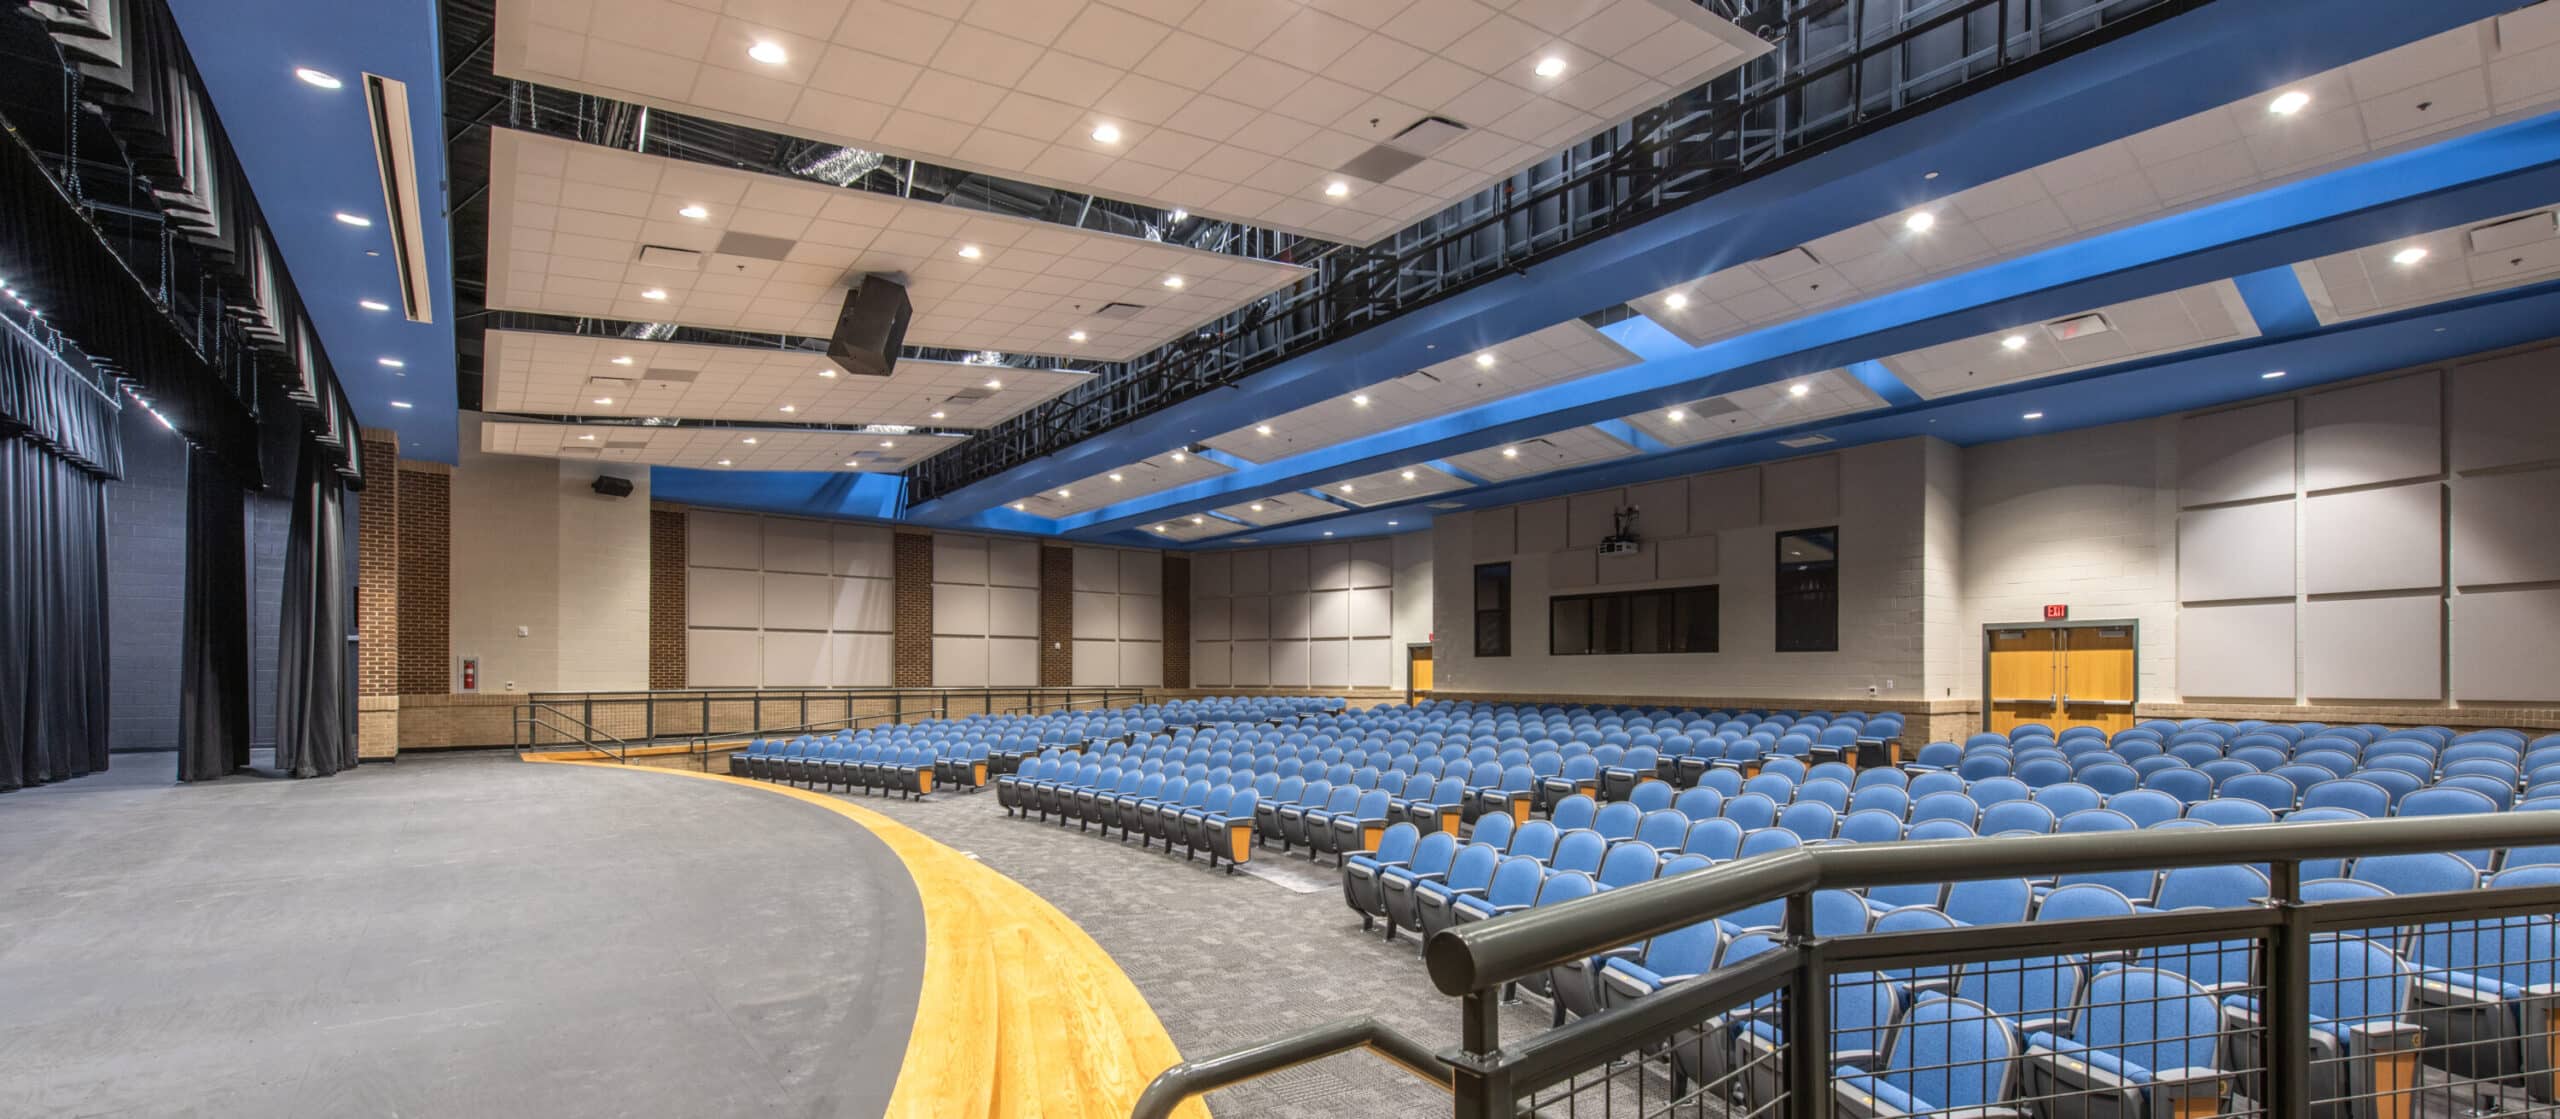 hall county schools performing arts center side angle from stage